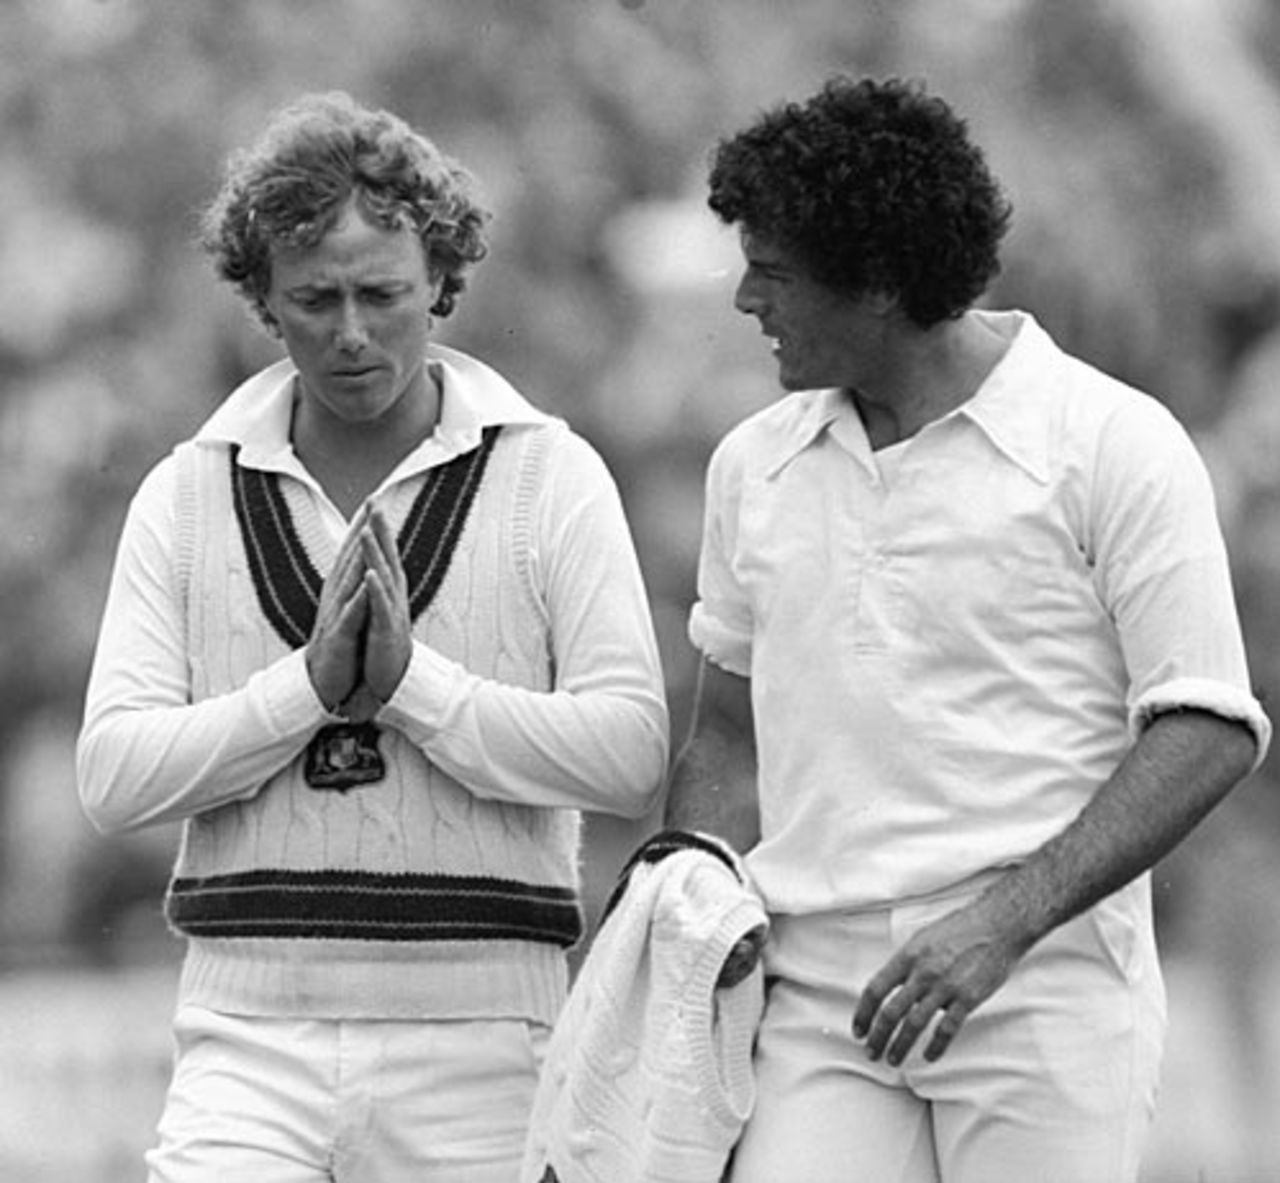 Kim Hughes discusses tactics with Mike Whitney, England v Australia, 5th Test, Old Trafford, August 1981